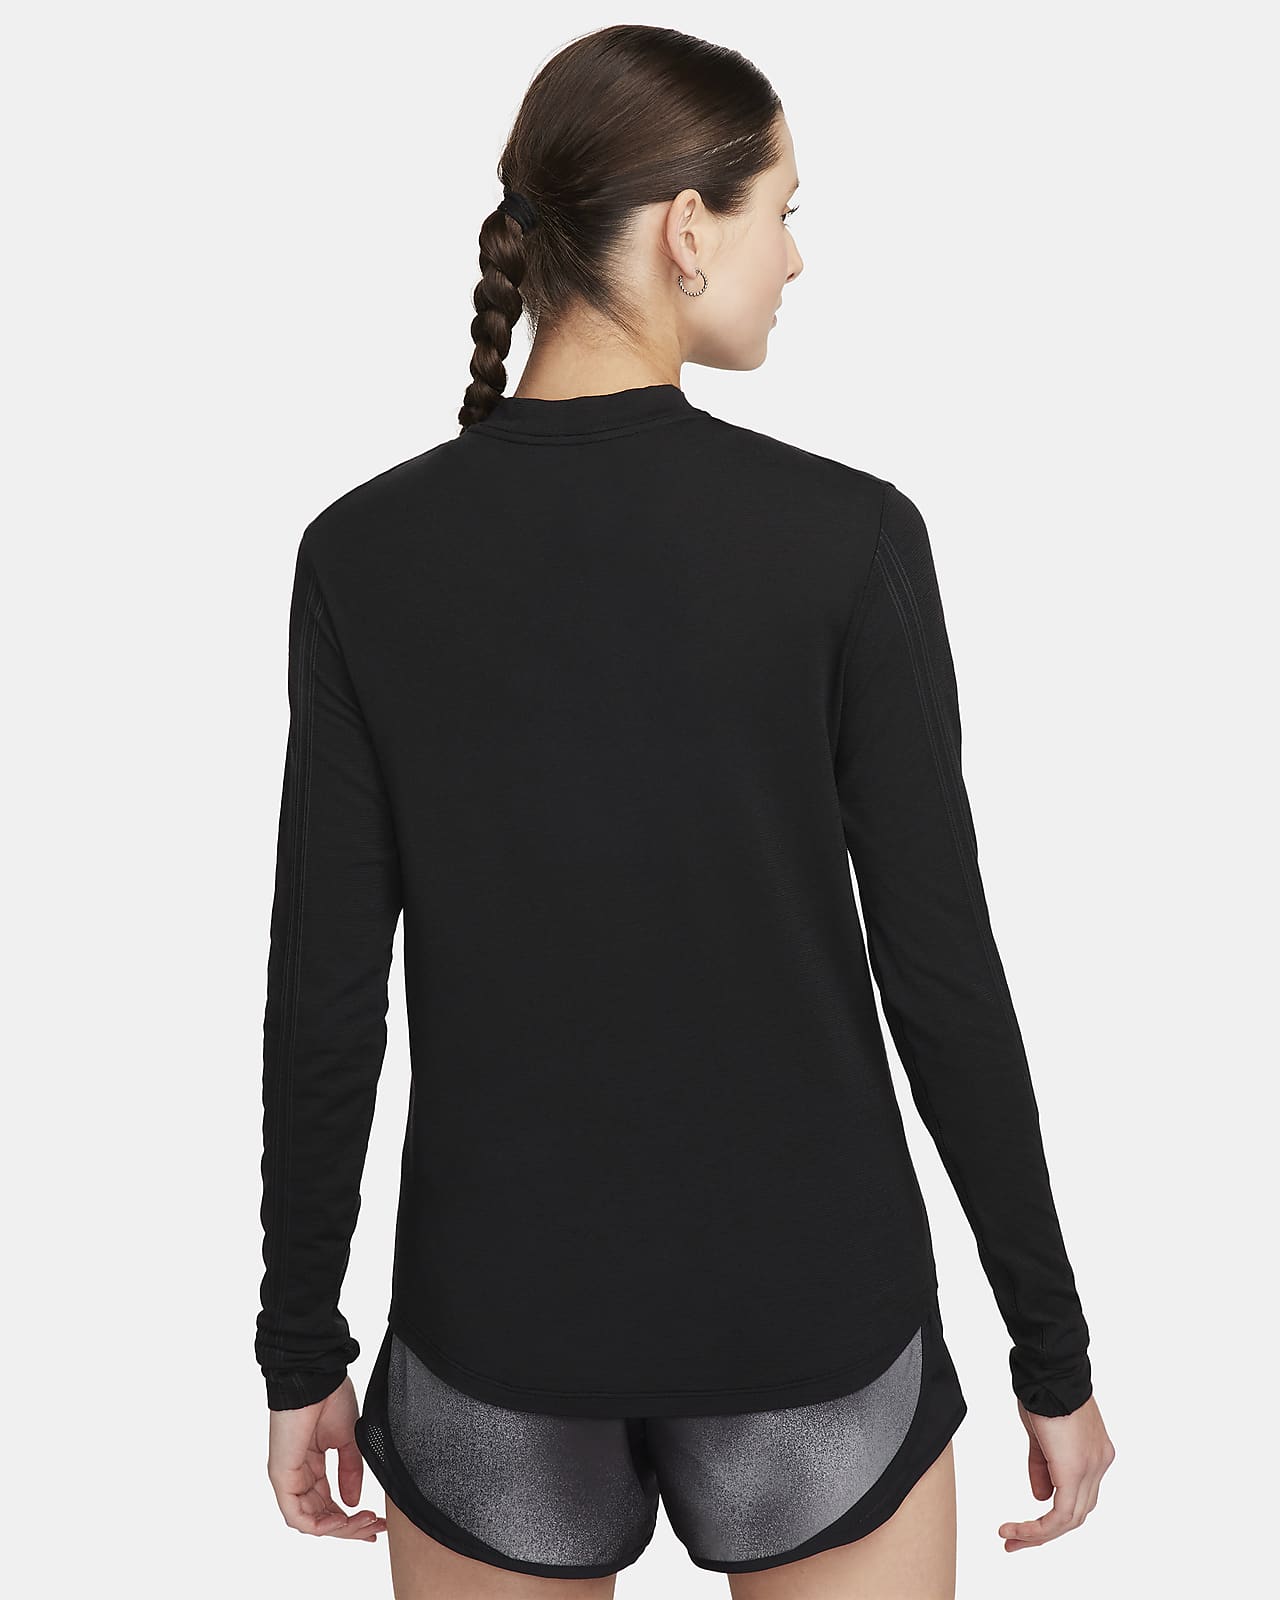 Women's Black Fitted Long Sleeve Top